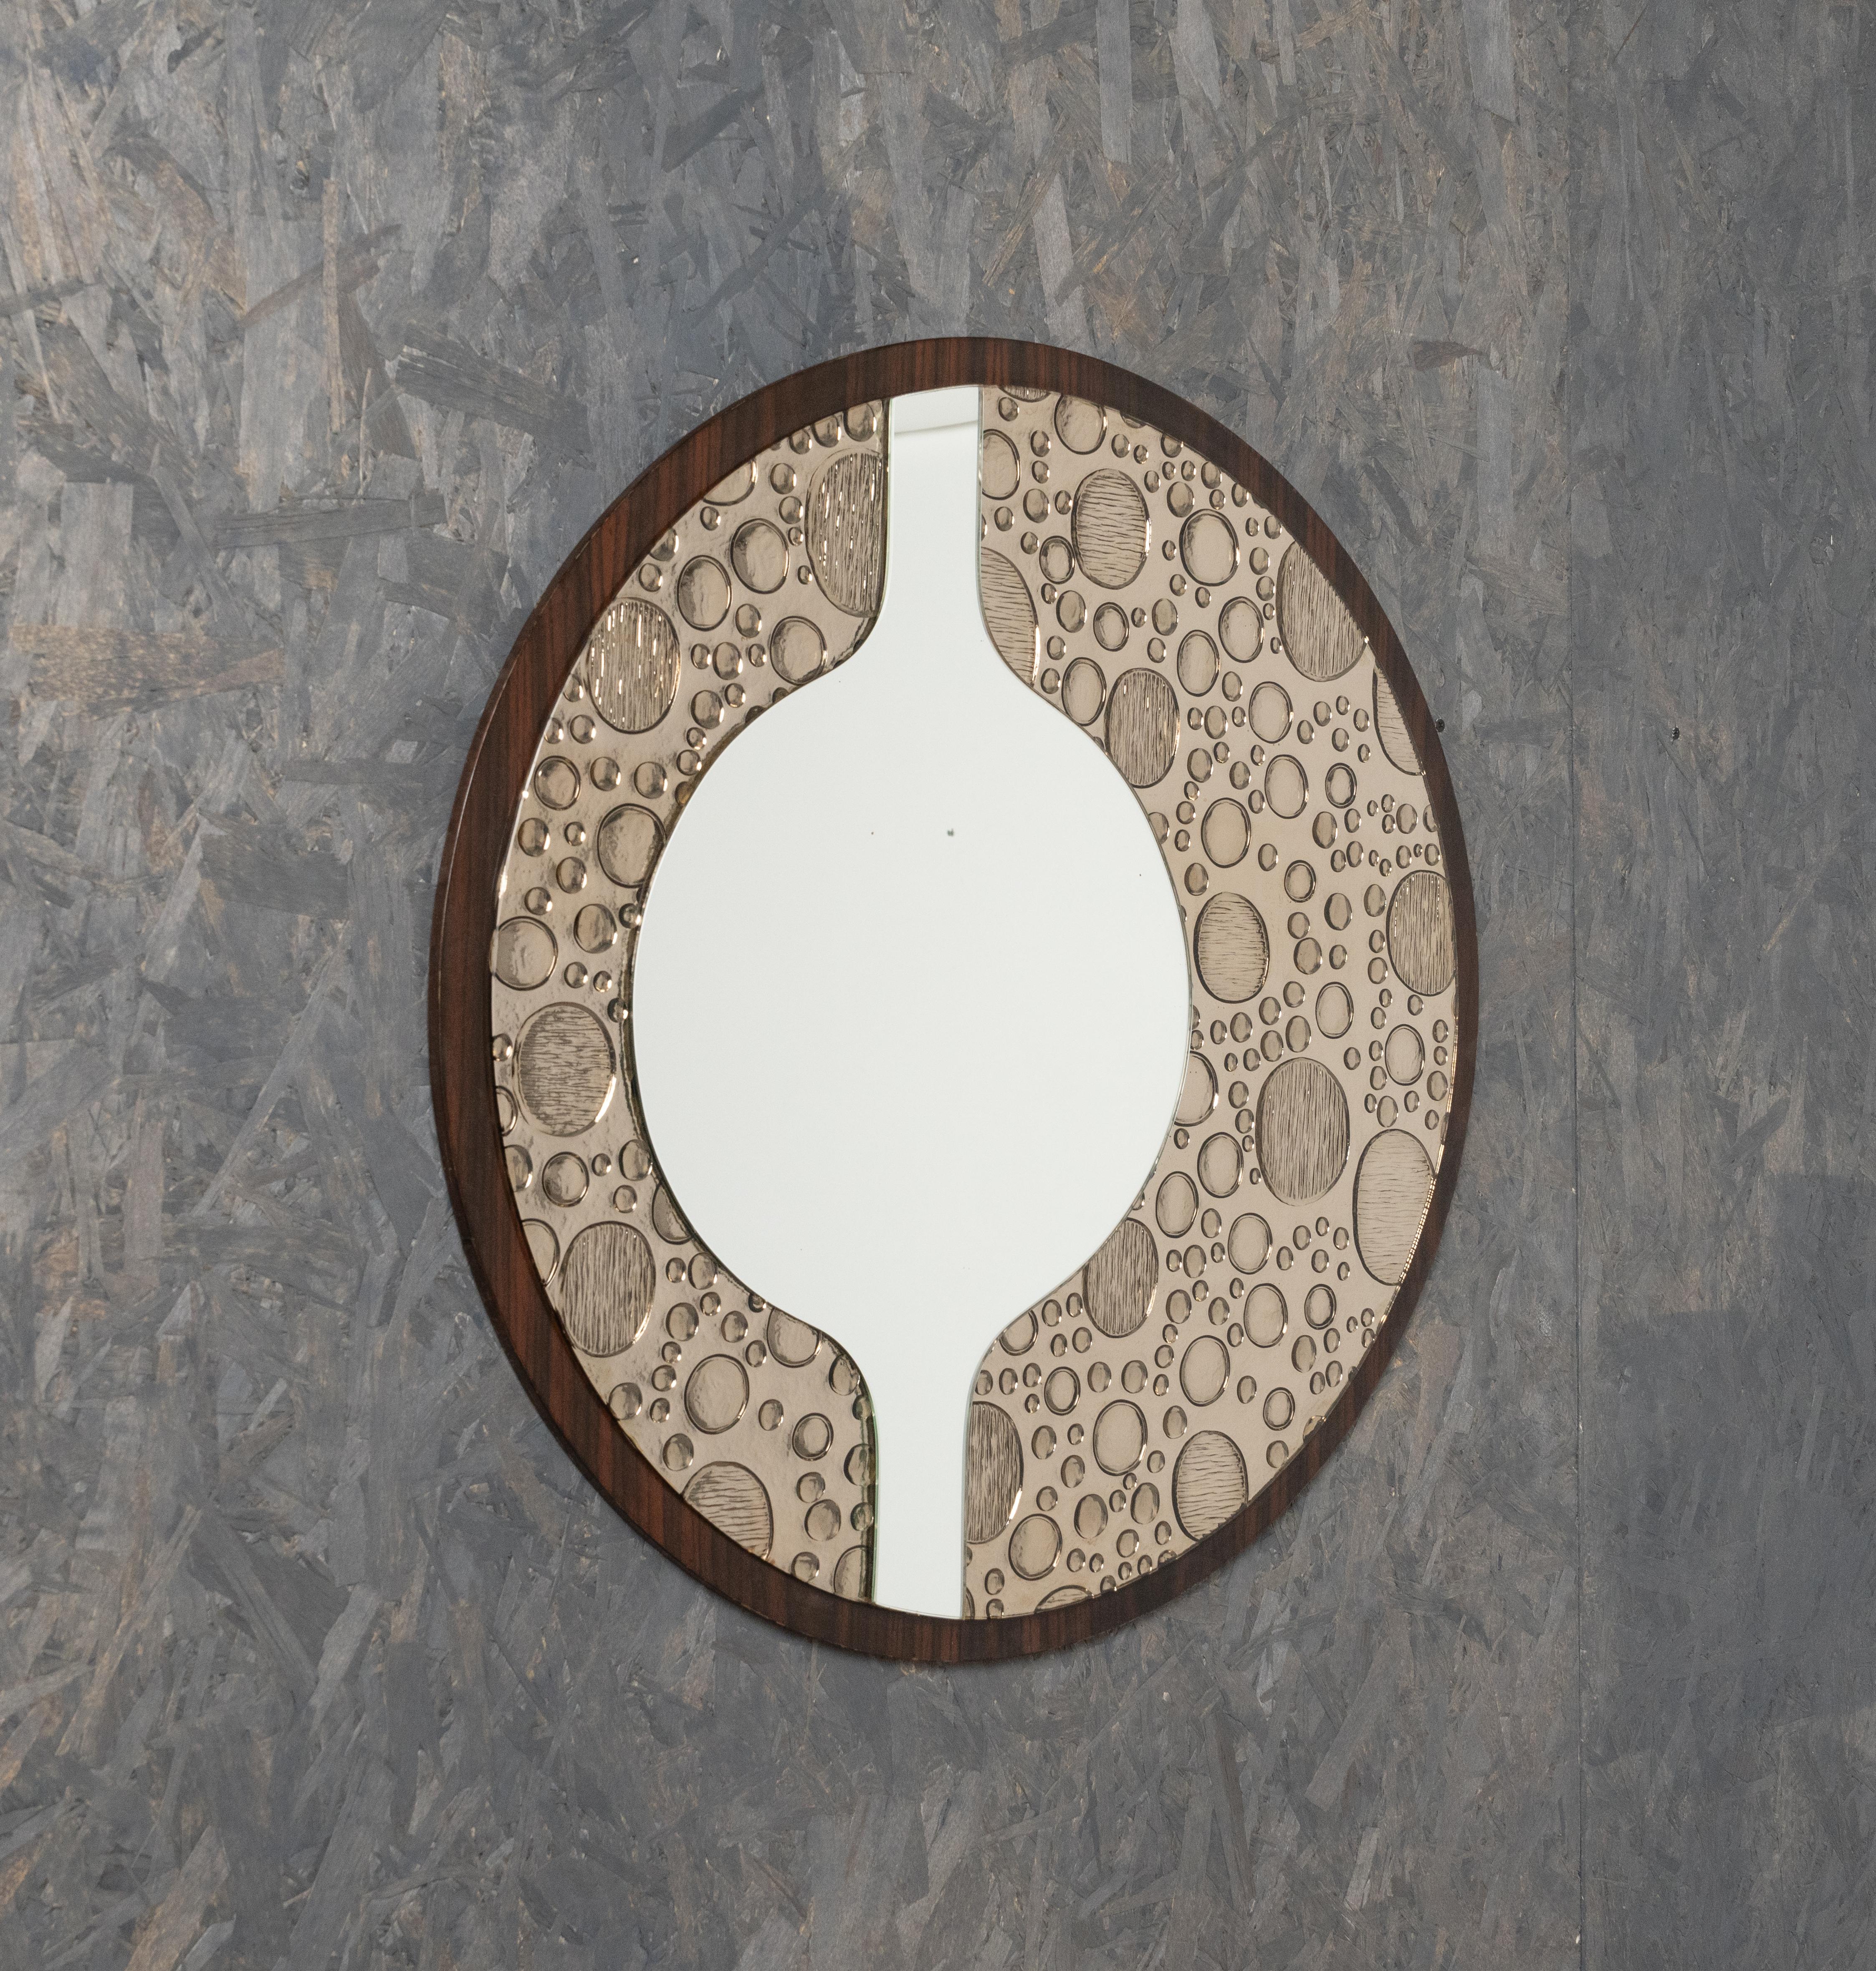 Midcentury Round Wall Mirror in Wood and Glass, Italy 1970s For Sale 5